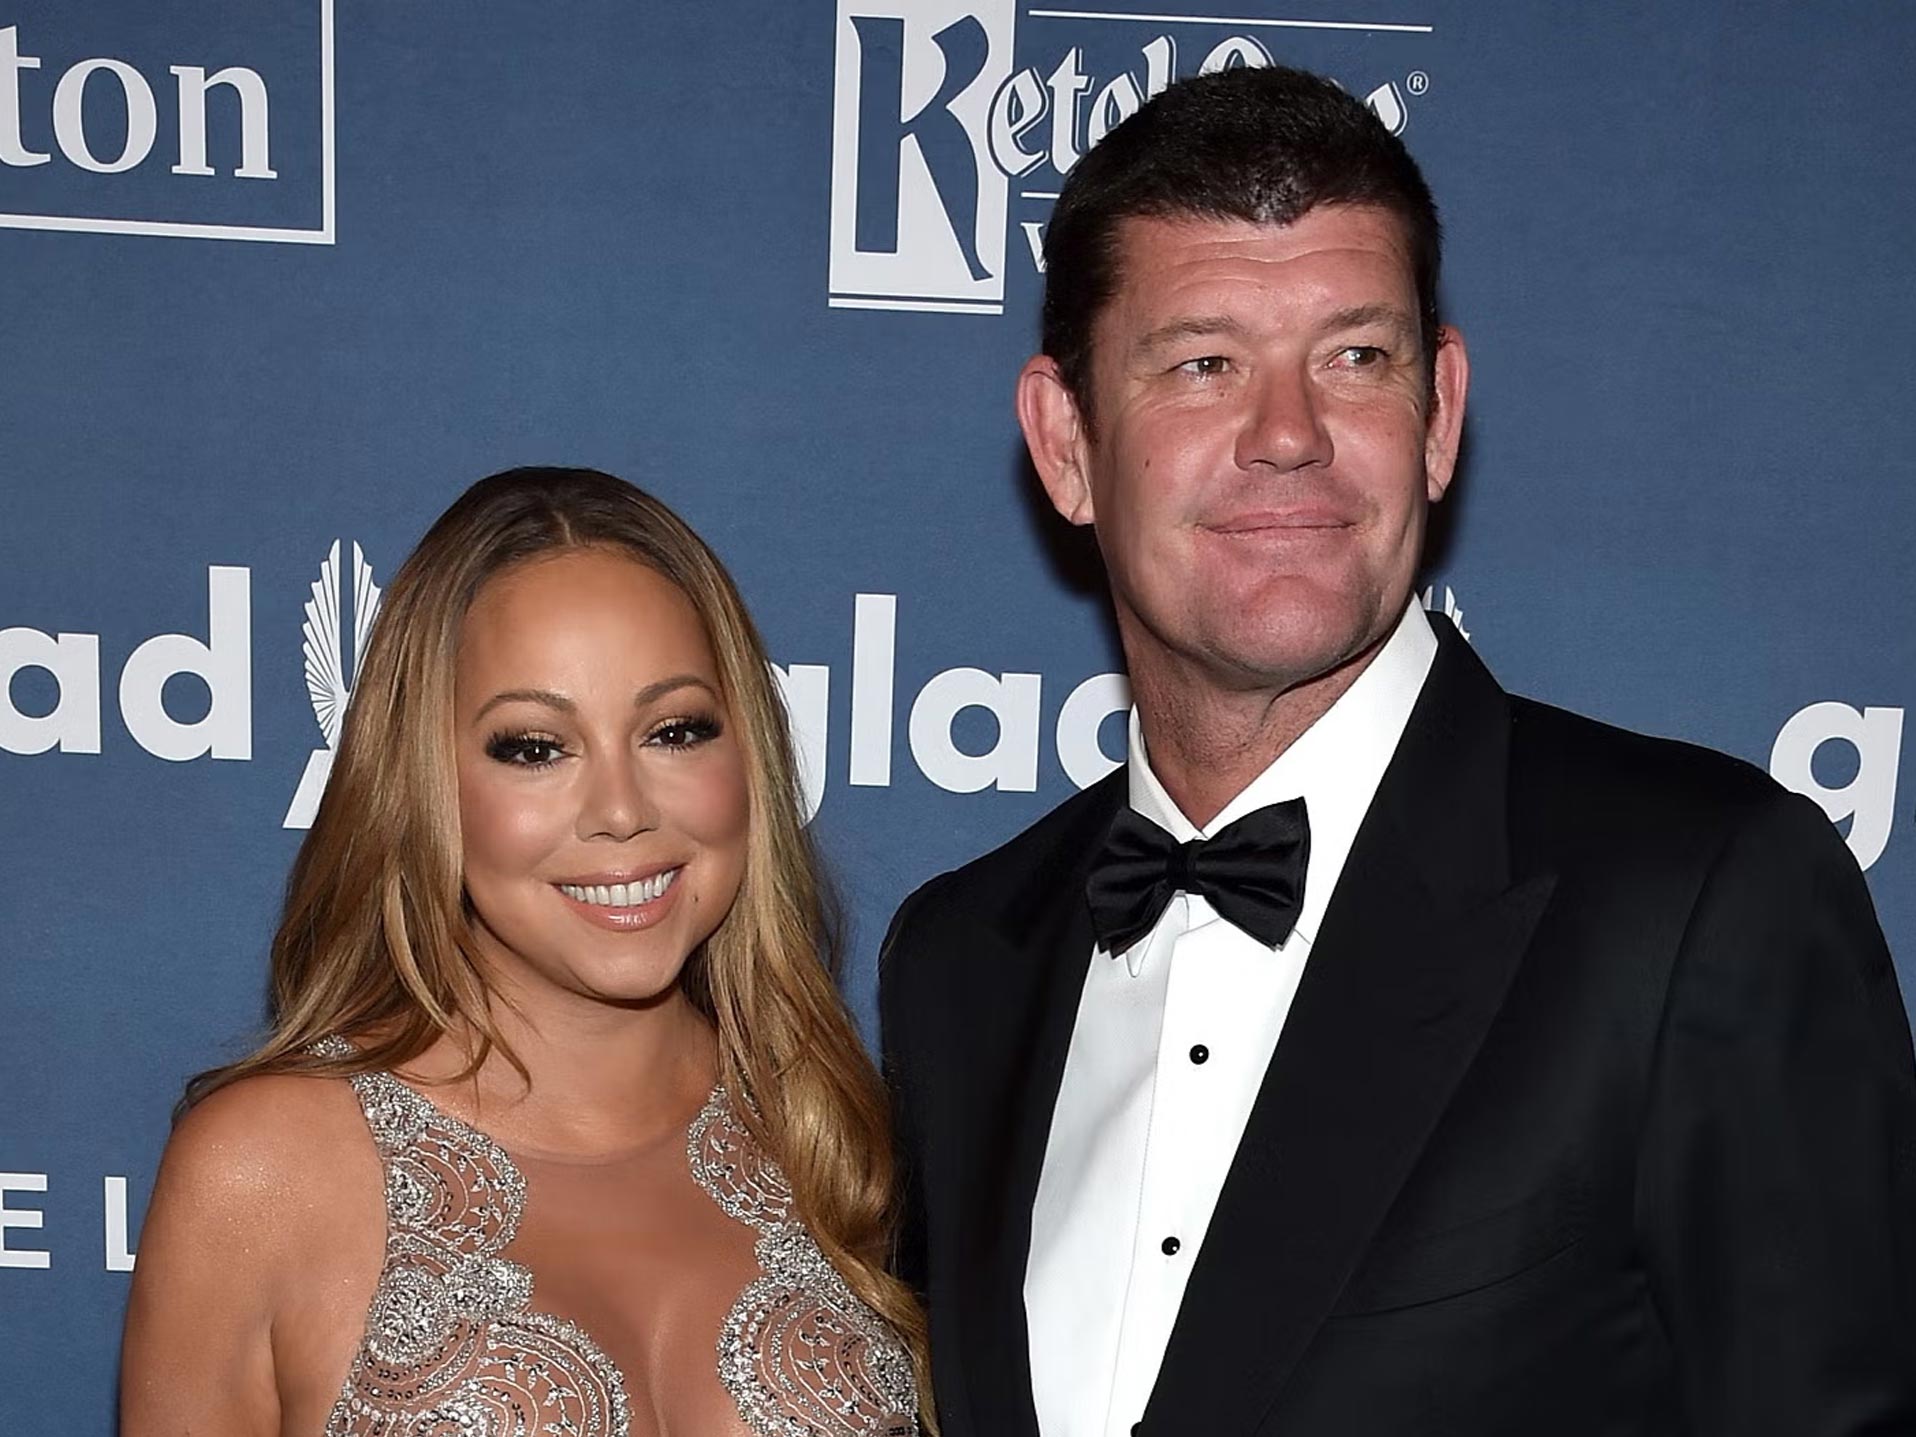 James Packer proposed to Mariah Carey with a 35-carat diamond ring